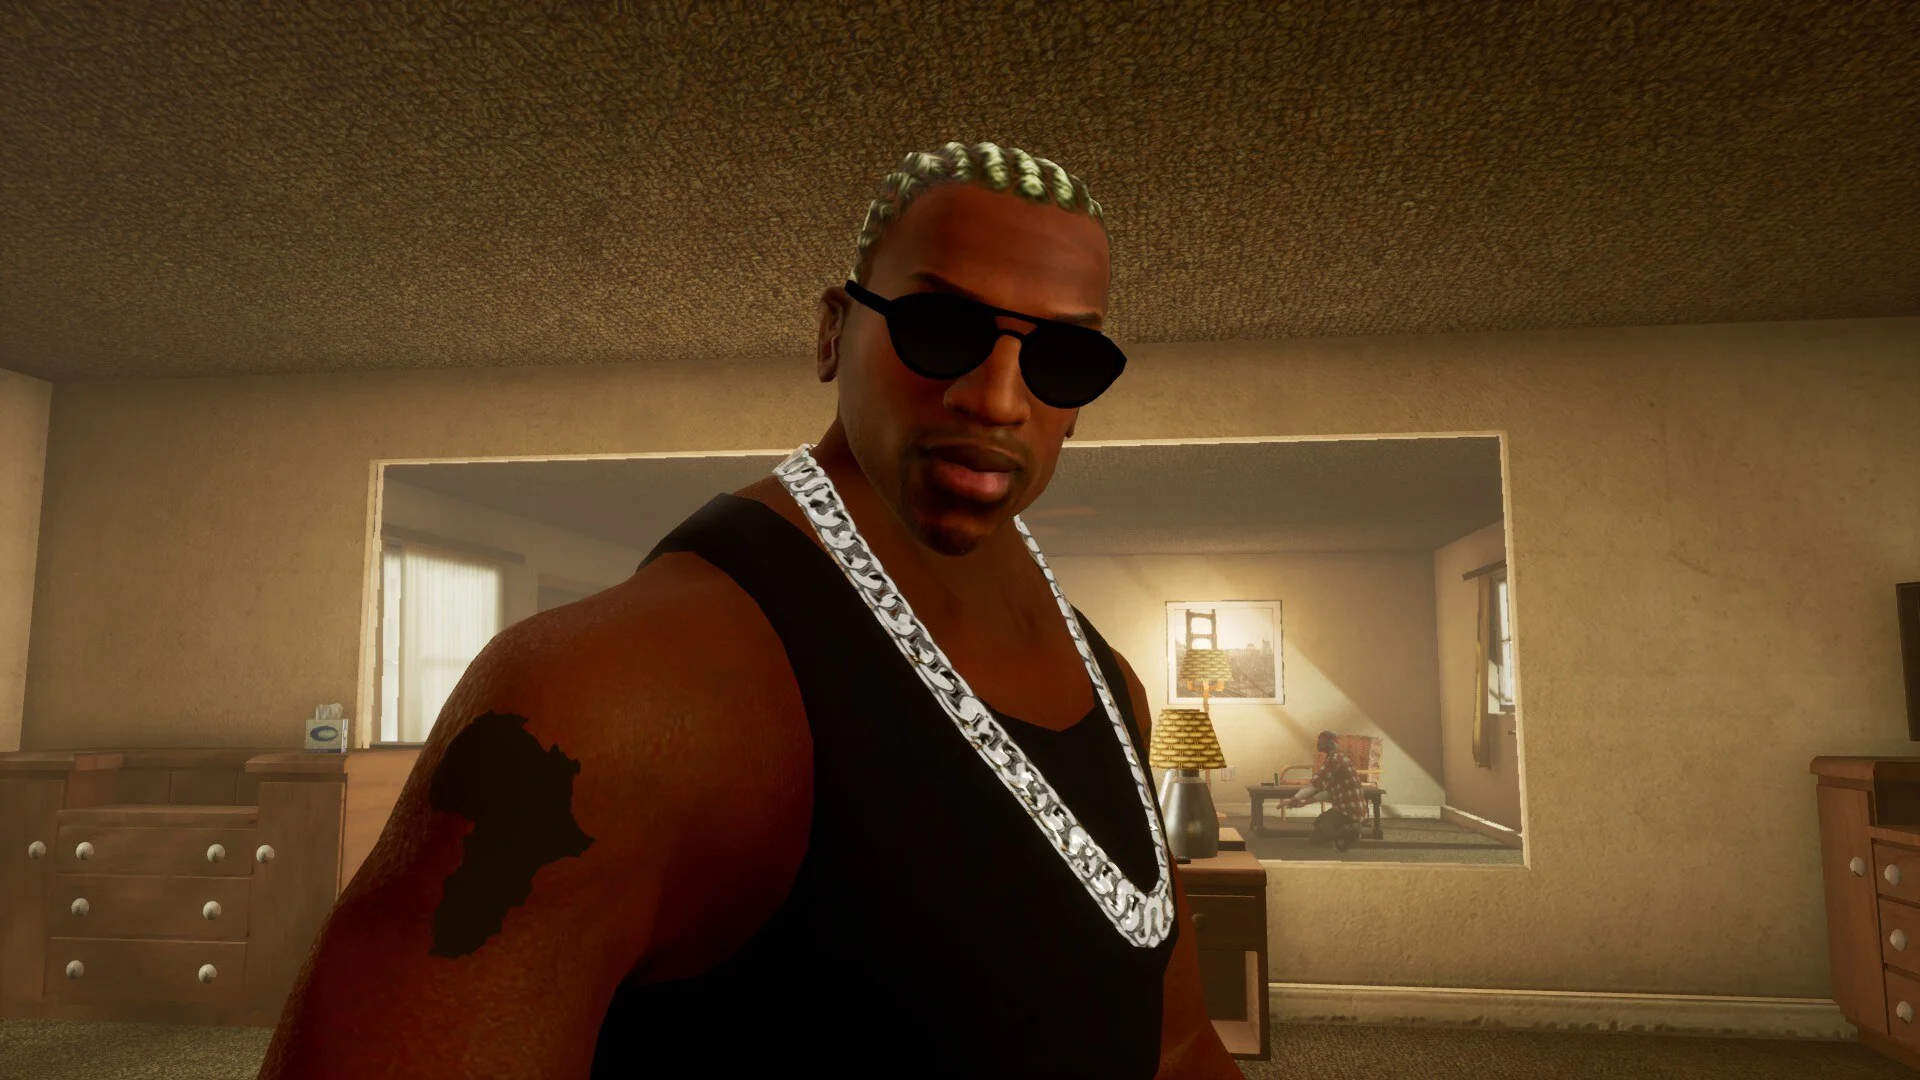 The mystery surrounding the mirrors in GTA: San Andreas has been revealed